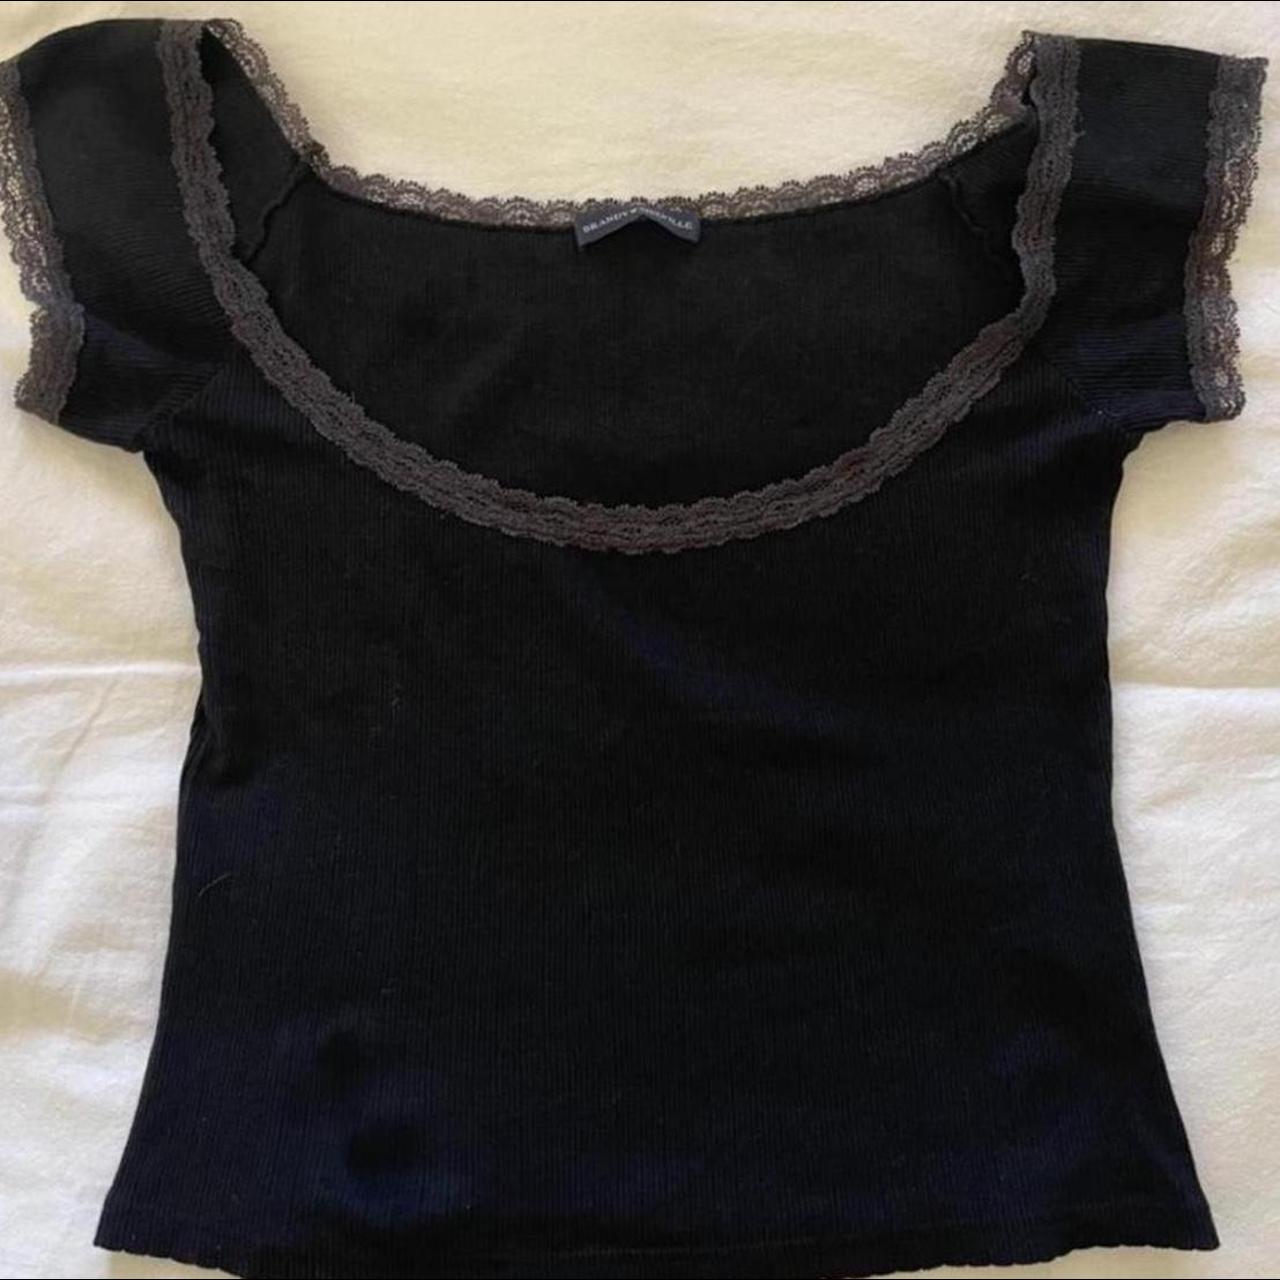 Brandy “Eden” Top thats very sought out for bnwt... - Depop